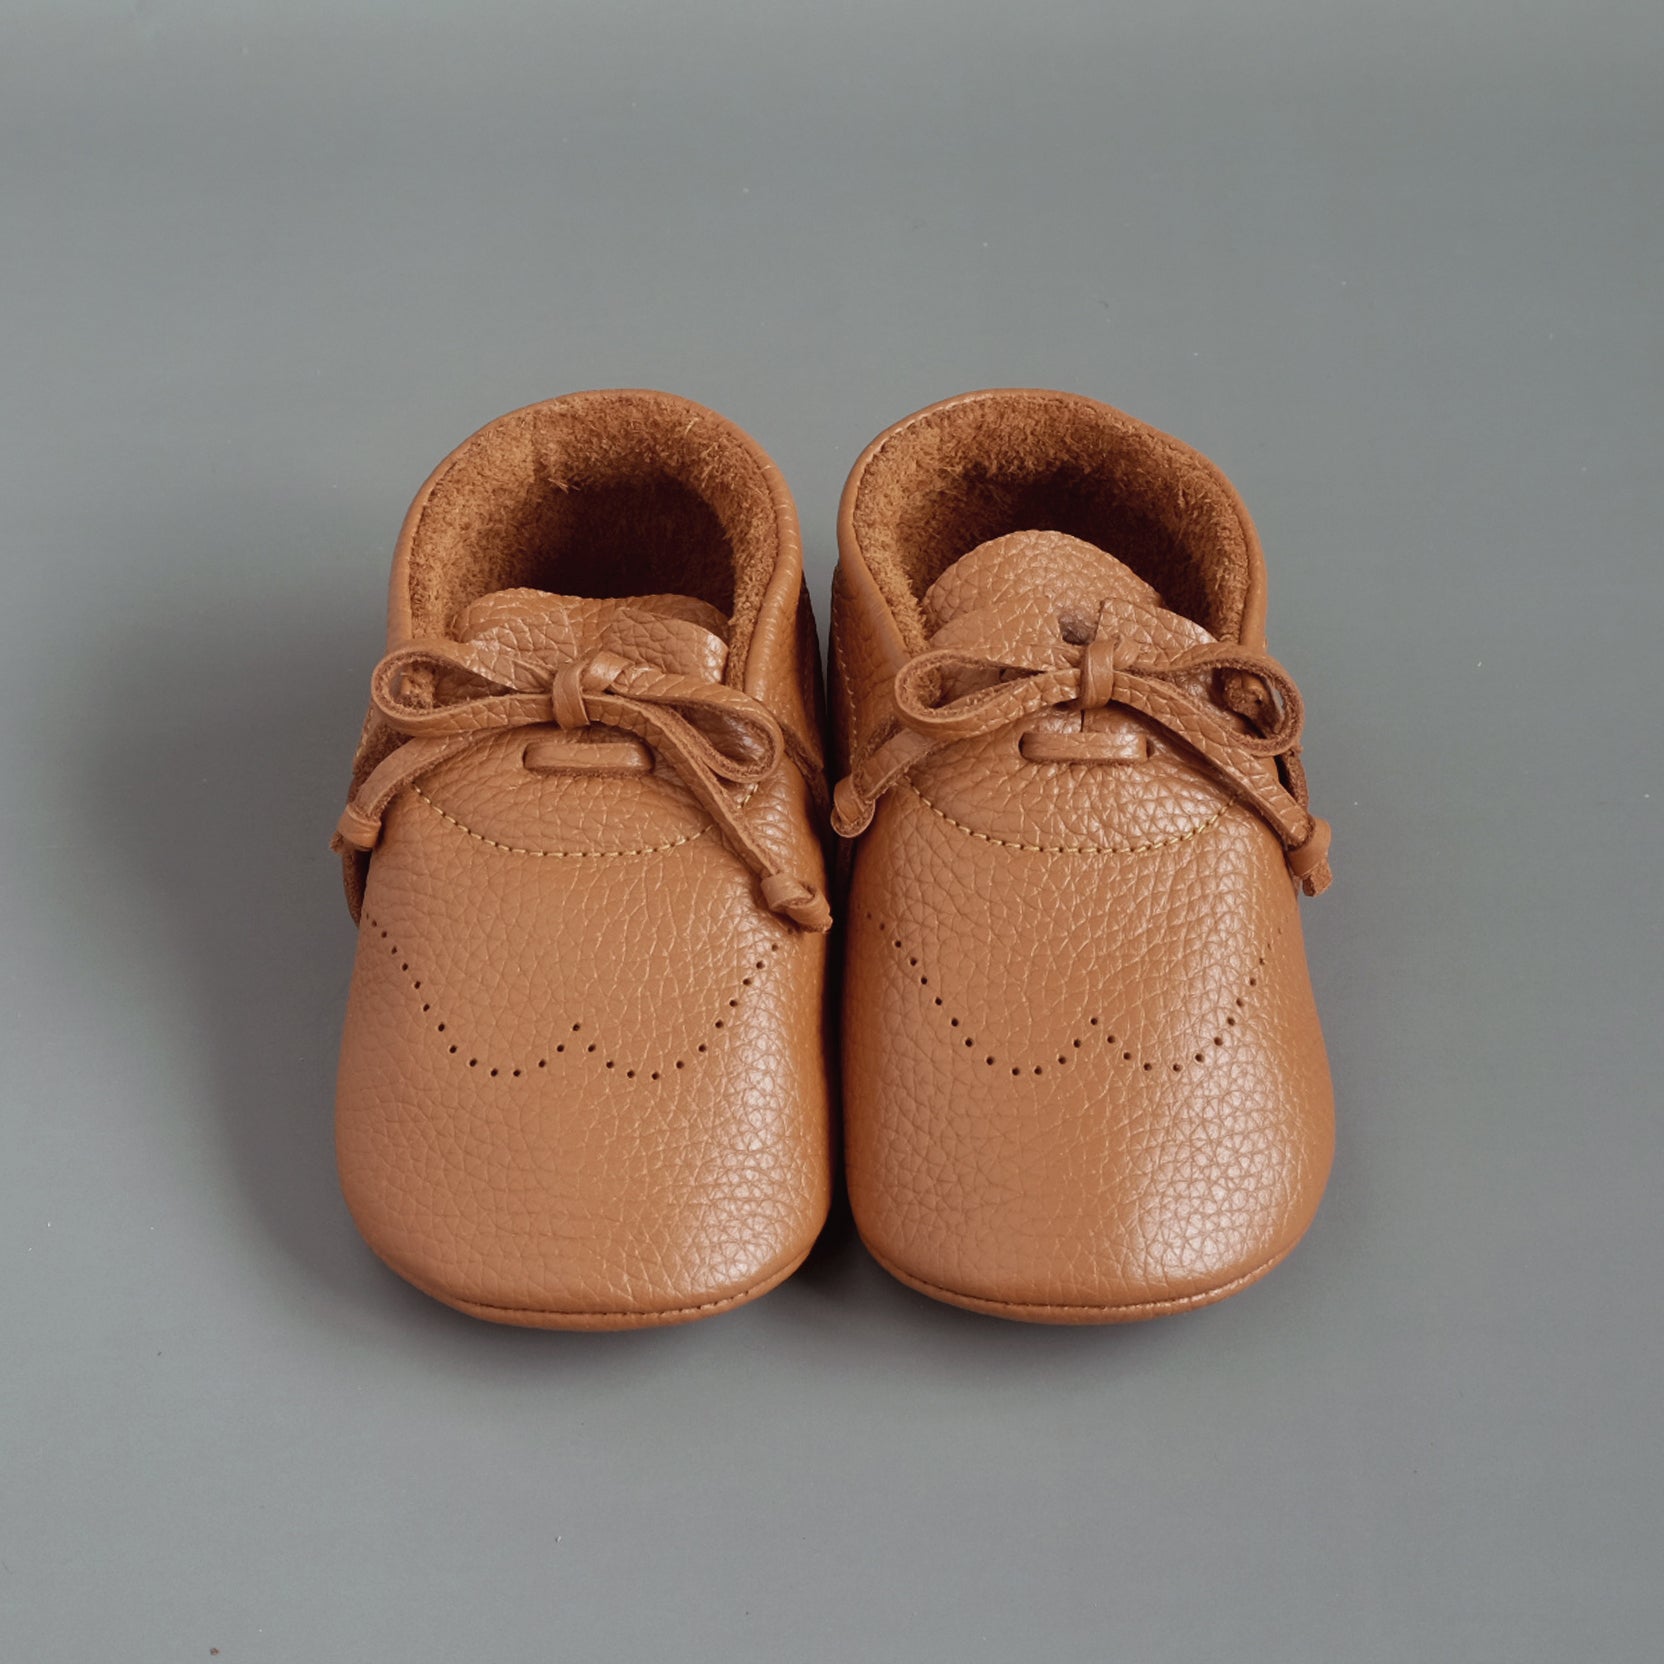 Milo Moccasin in Gingerbread